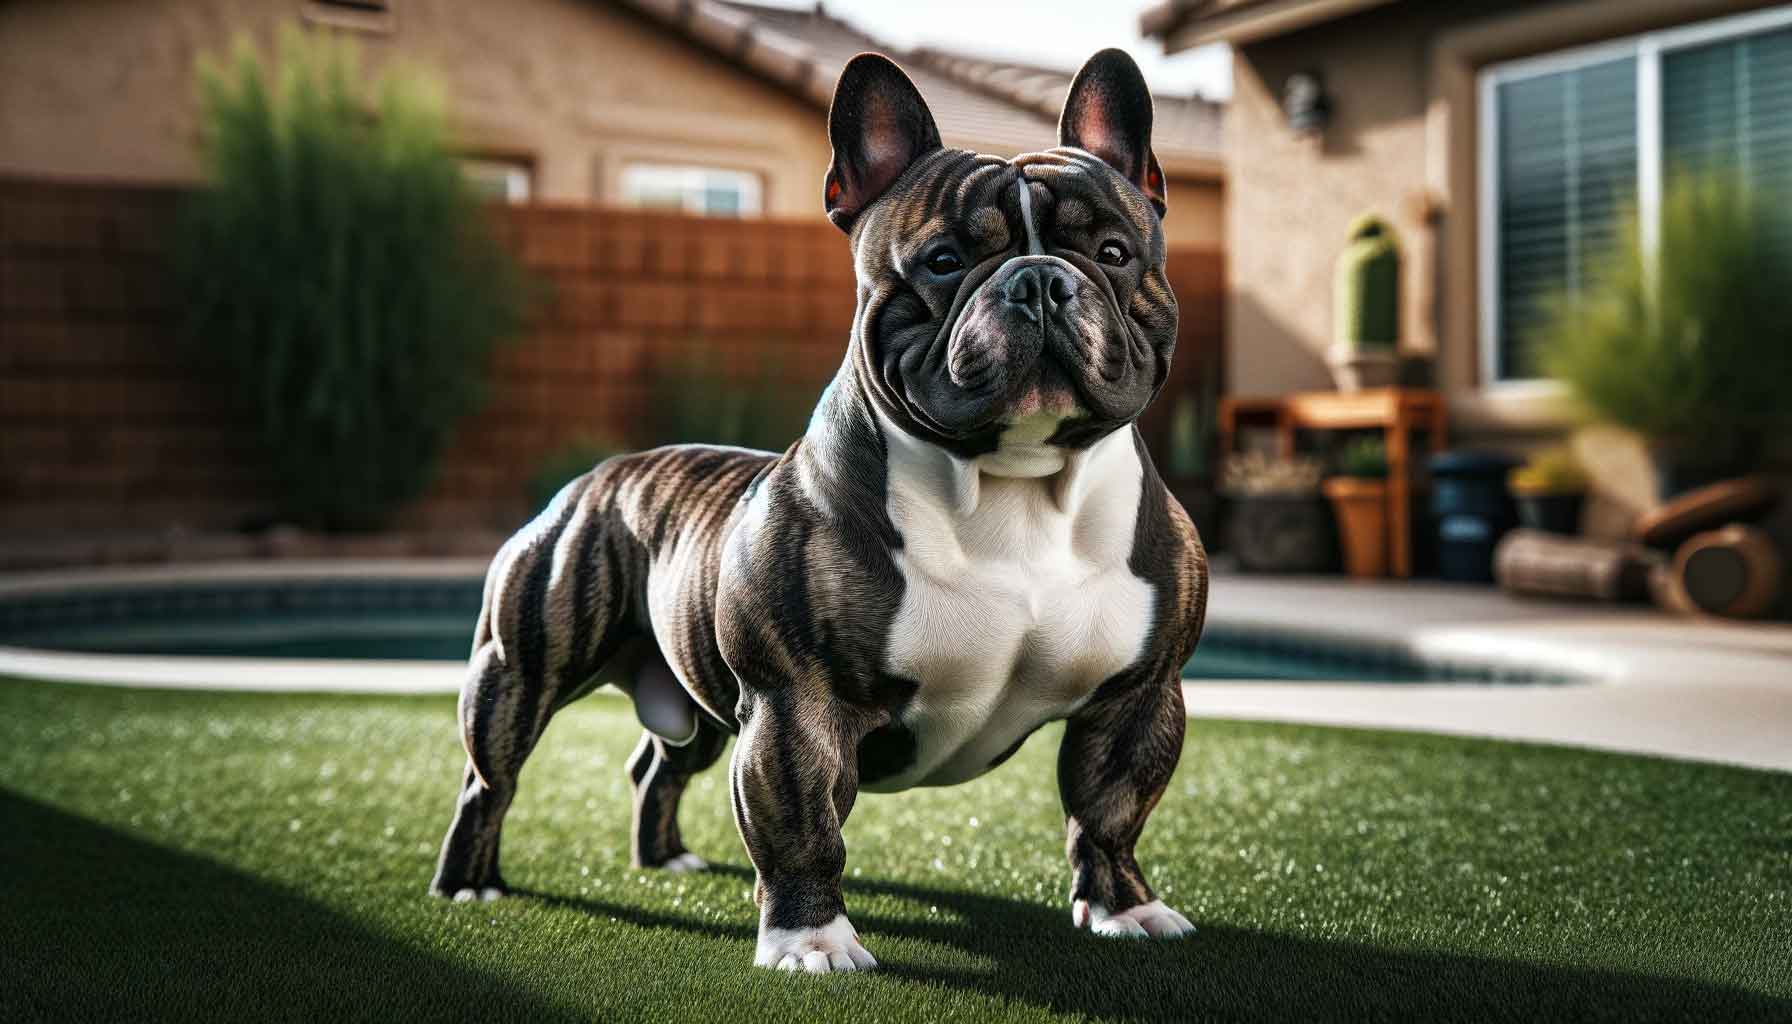 Photograph of a muscular micro bully and French bulldog mix with a brindle and white coat, standing in a well-kept backyard with manicured grass and decorative plants, under soft afternoon sunlight.